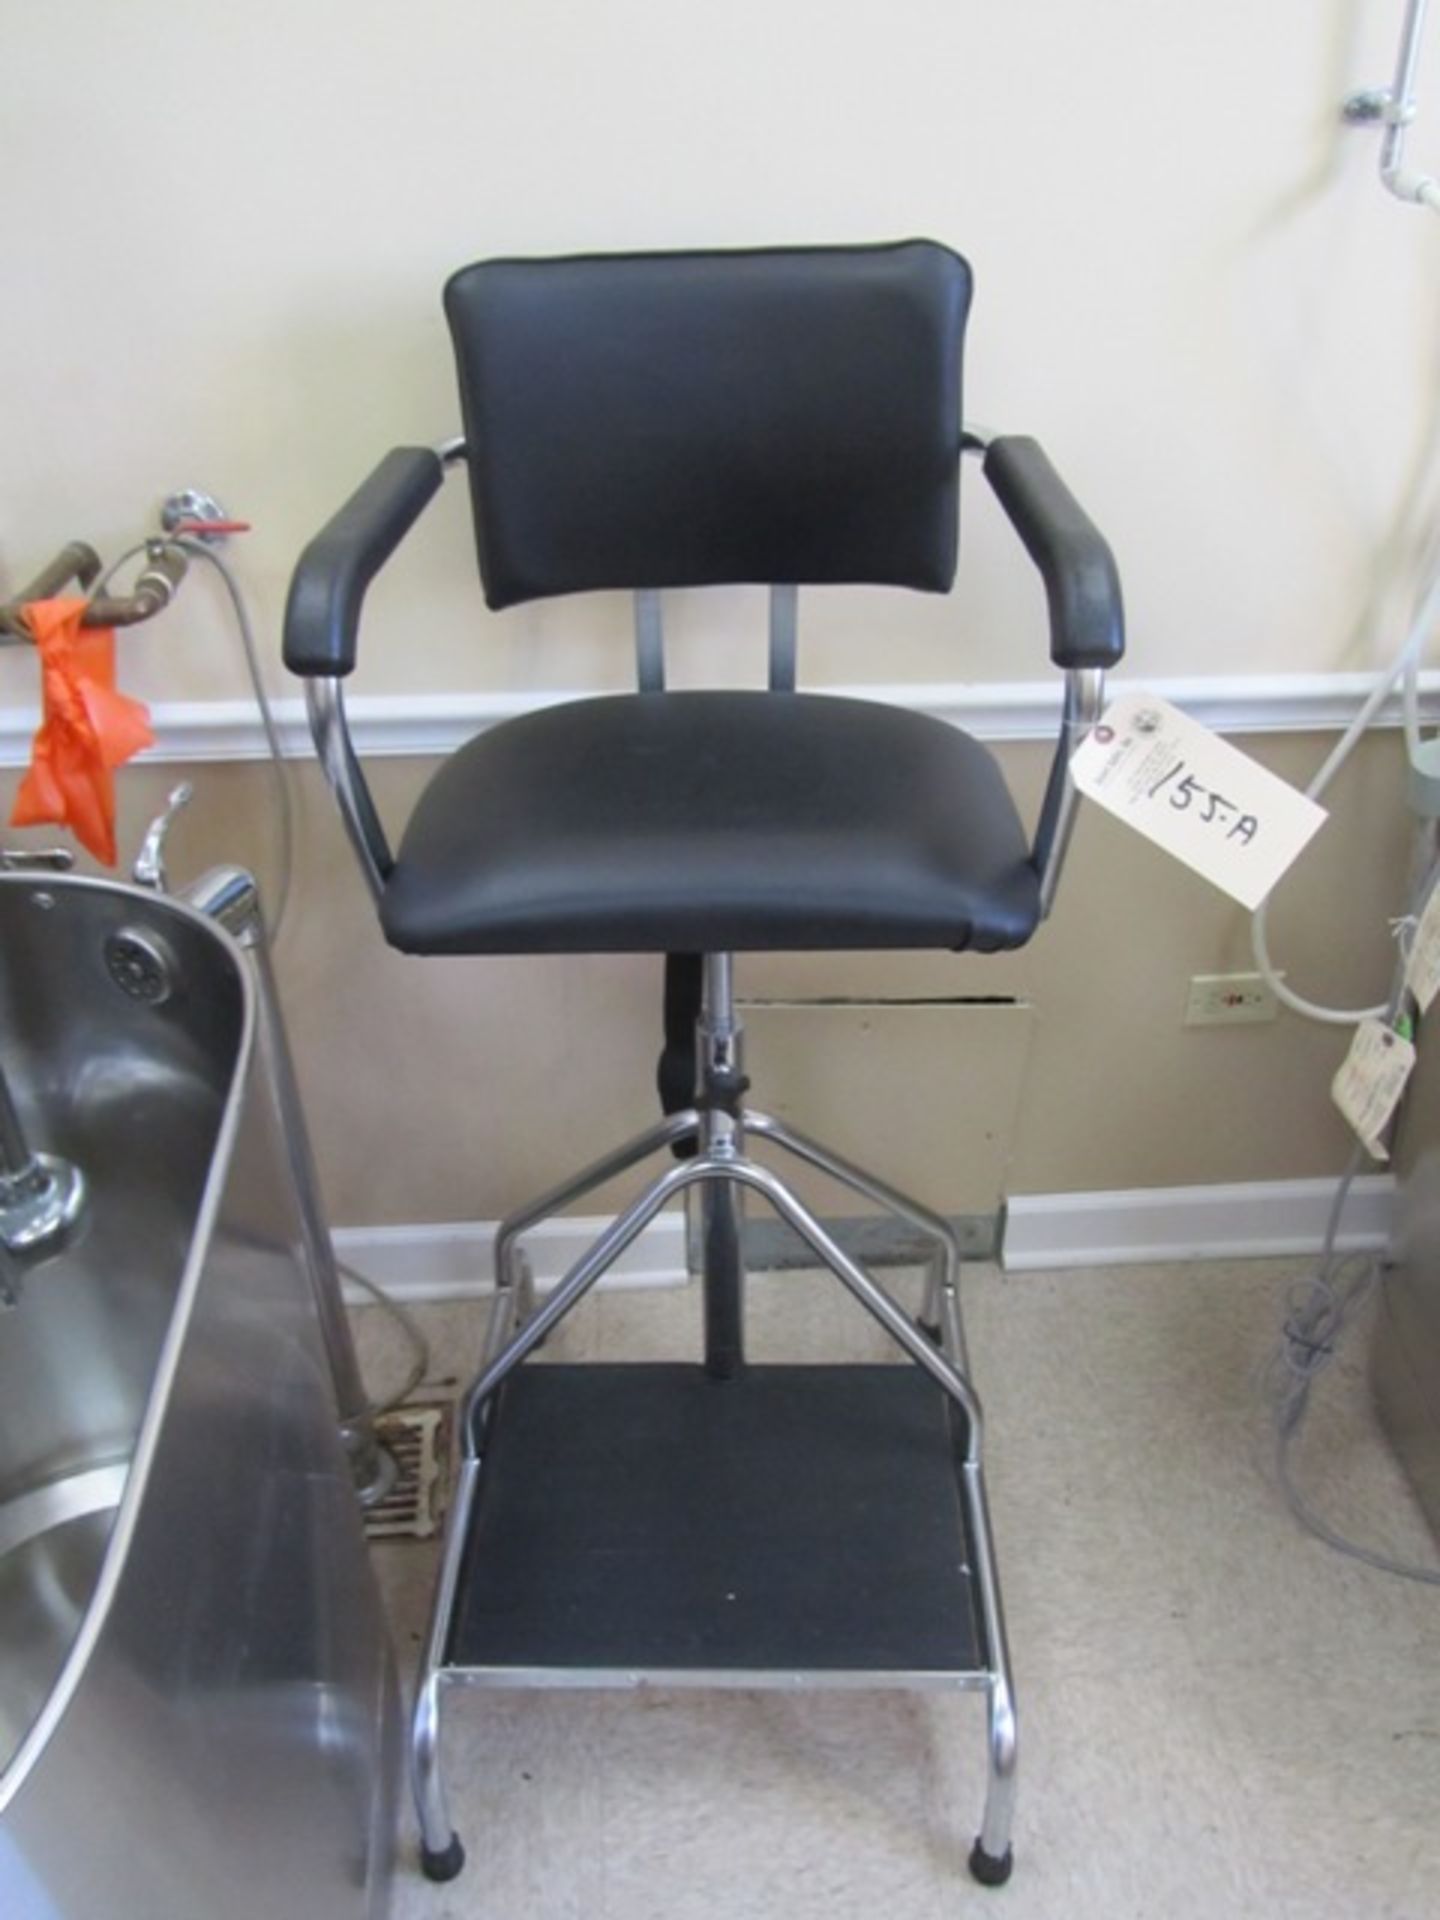 Elevated Chair for Whirlpool*located Oak Lawn, IL